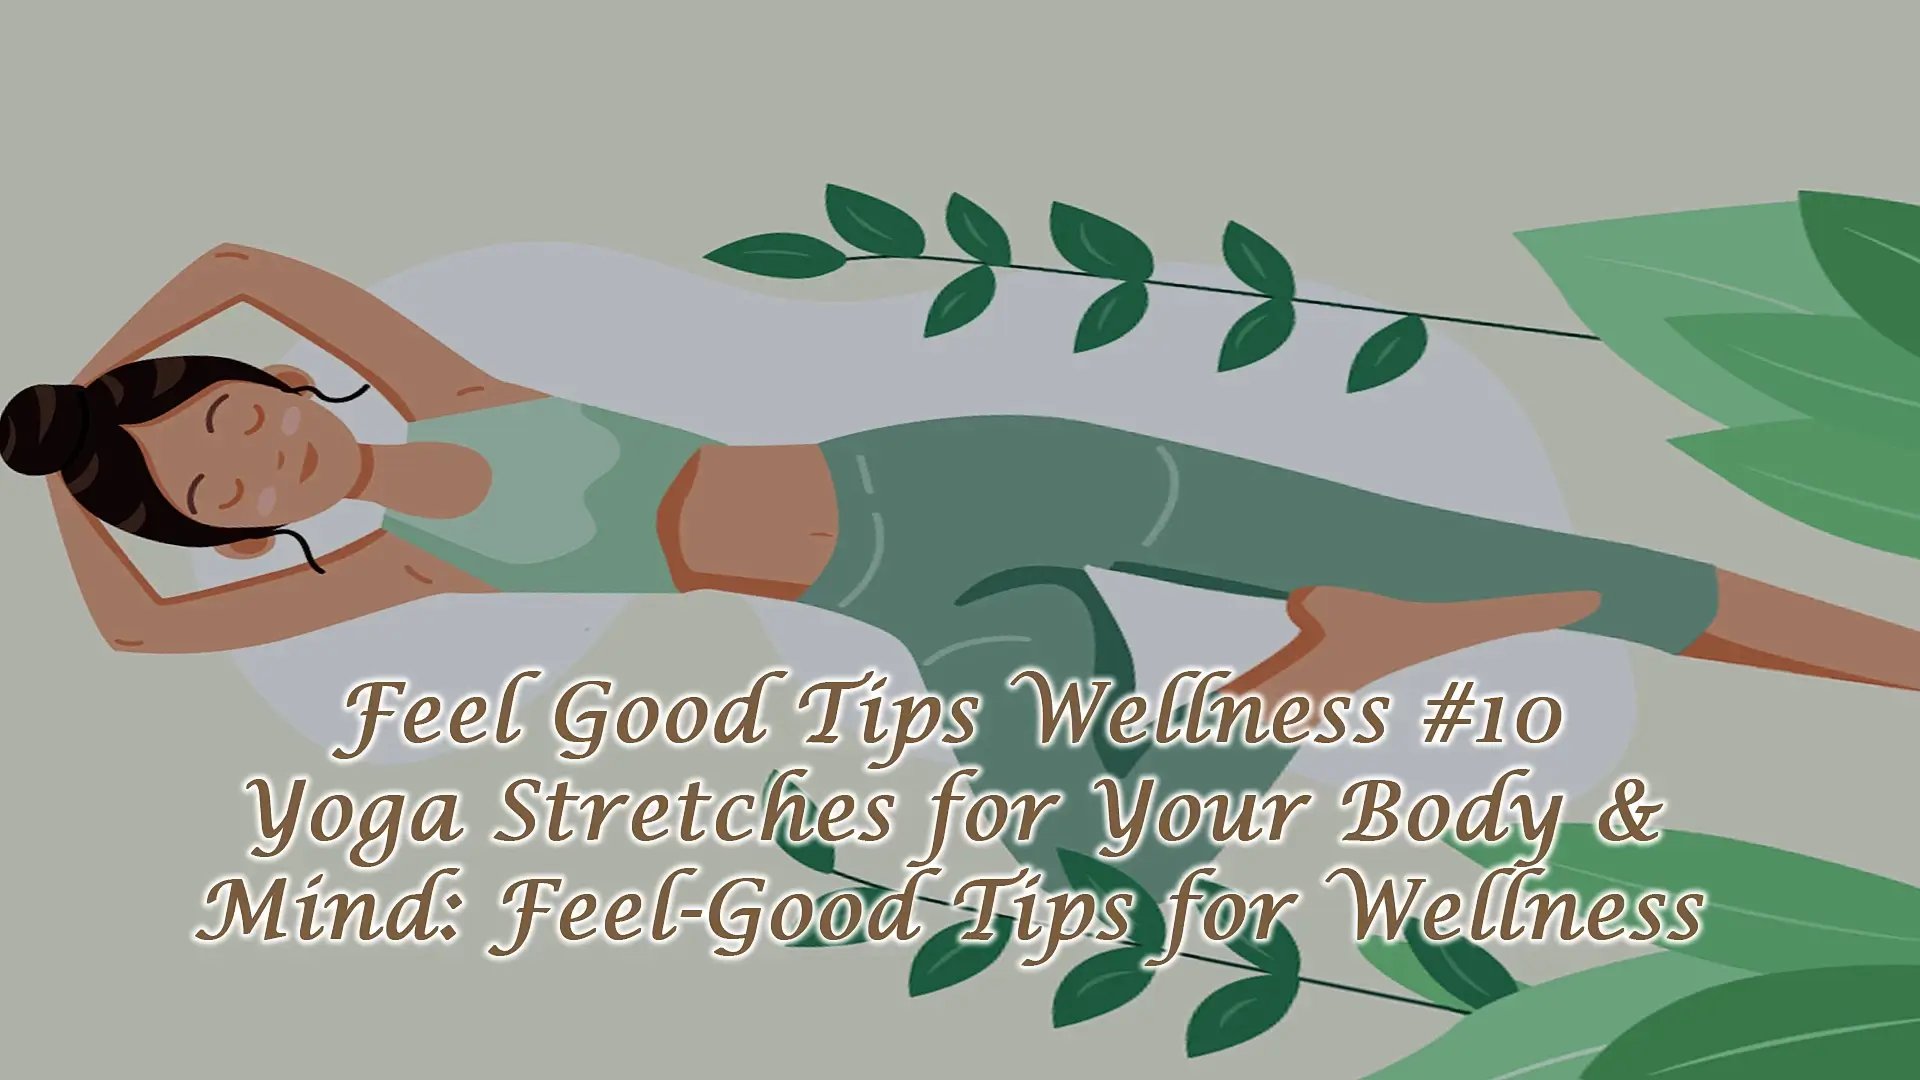 Yoga Stretches for Your Body & Mind: Feel-Good Tips for Wellness